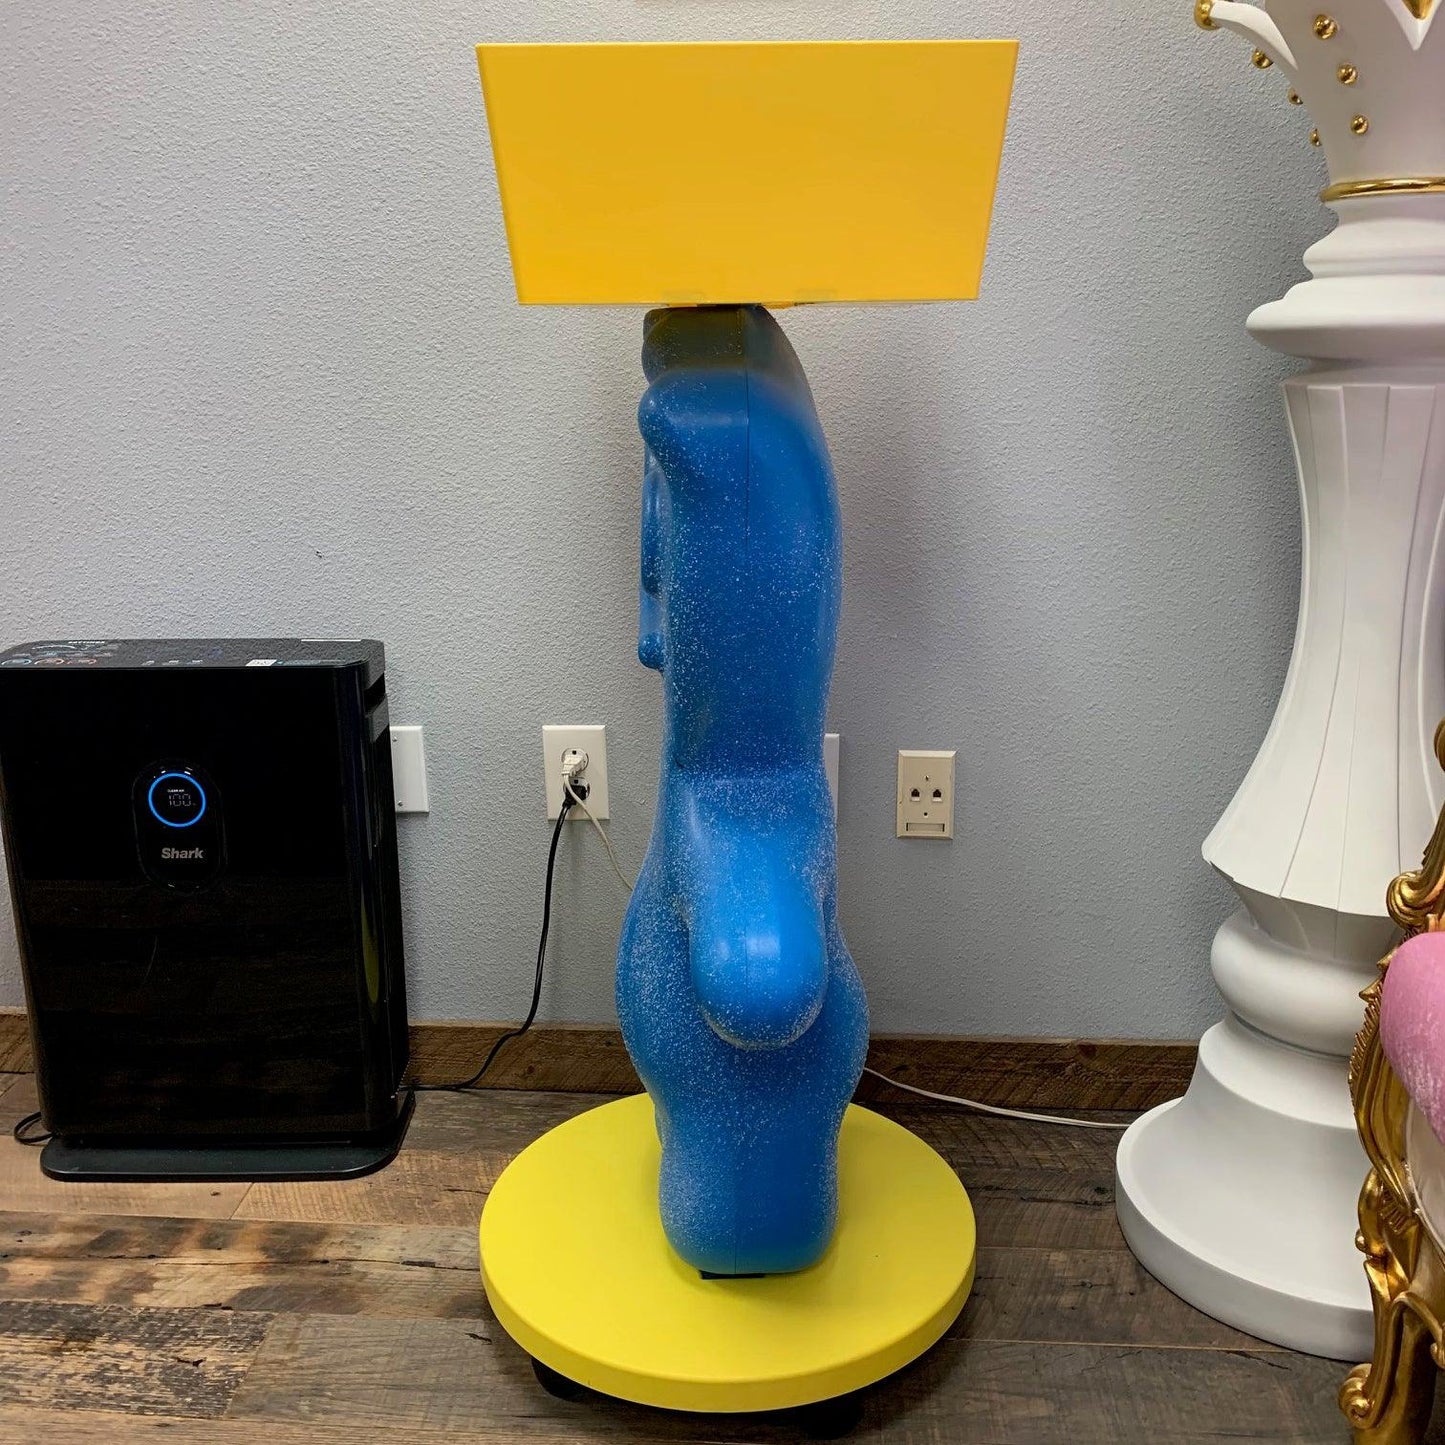 Blue Sour Patch Kid Tray Statue